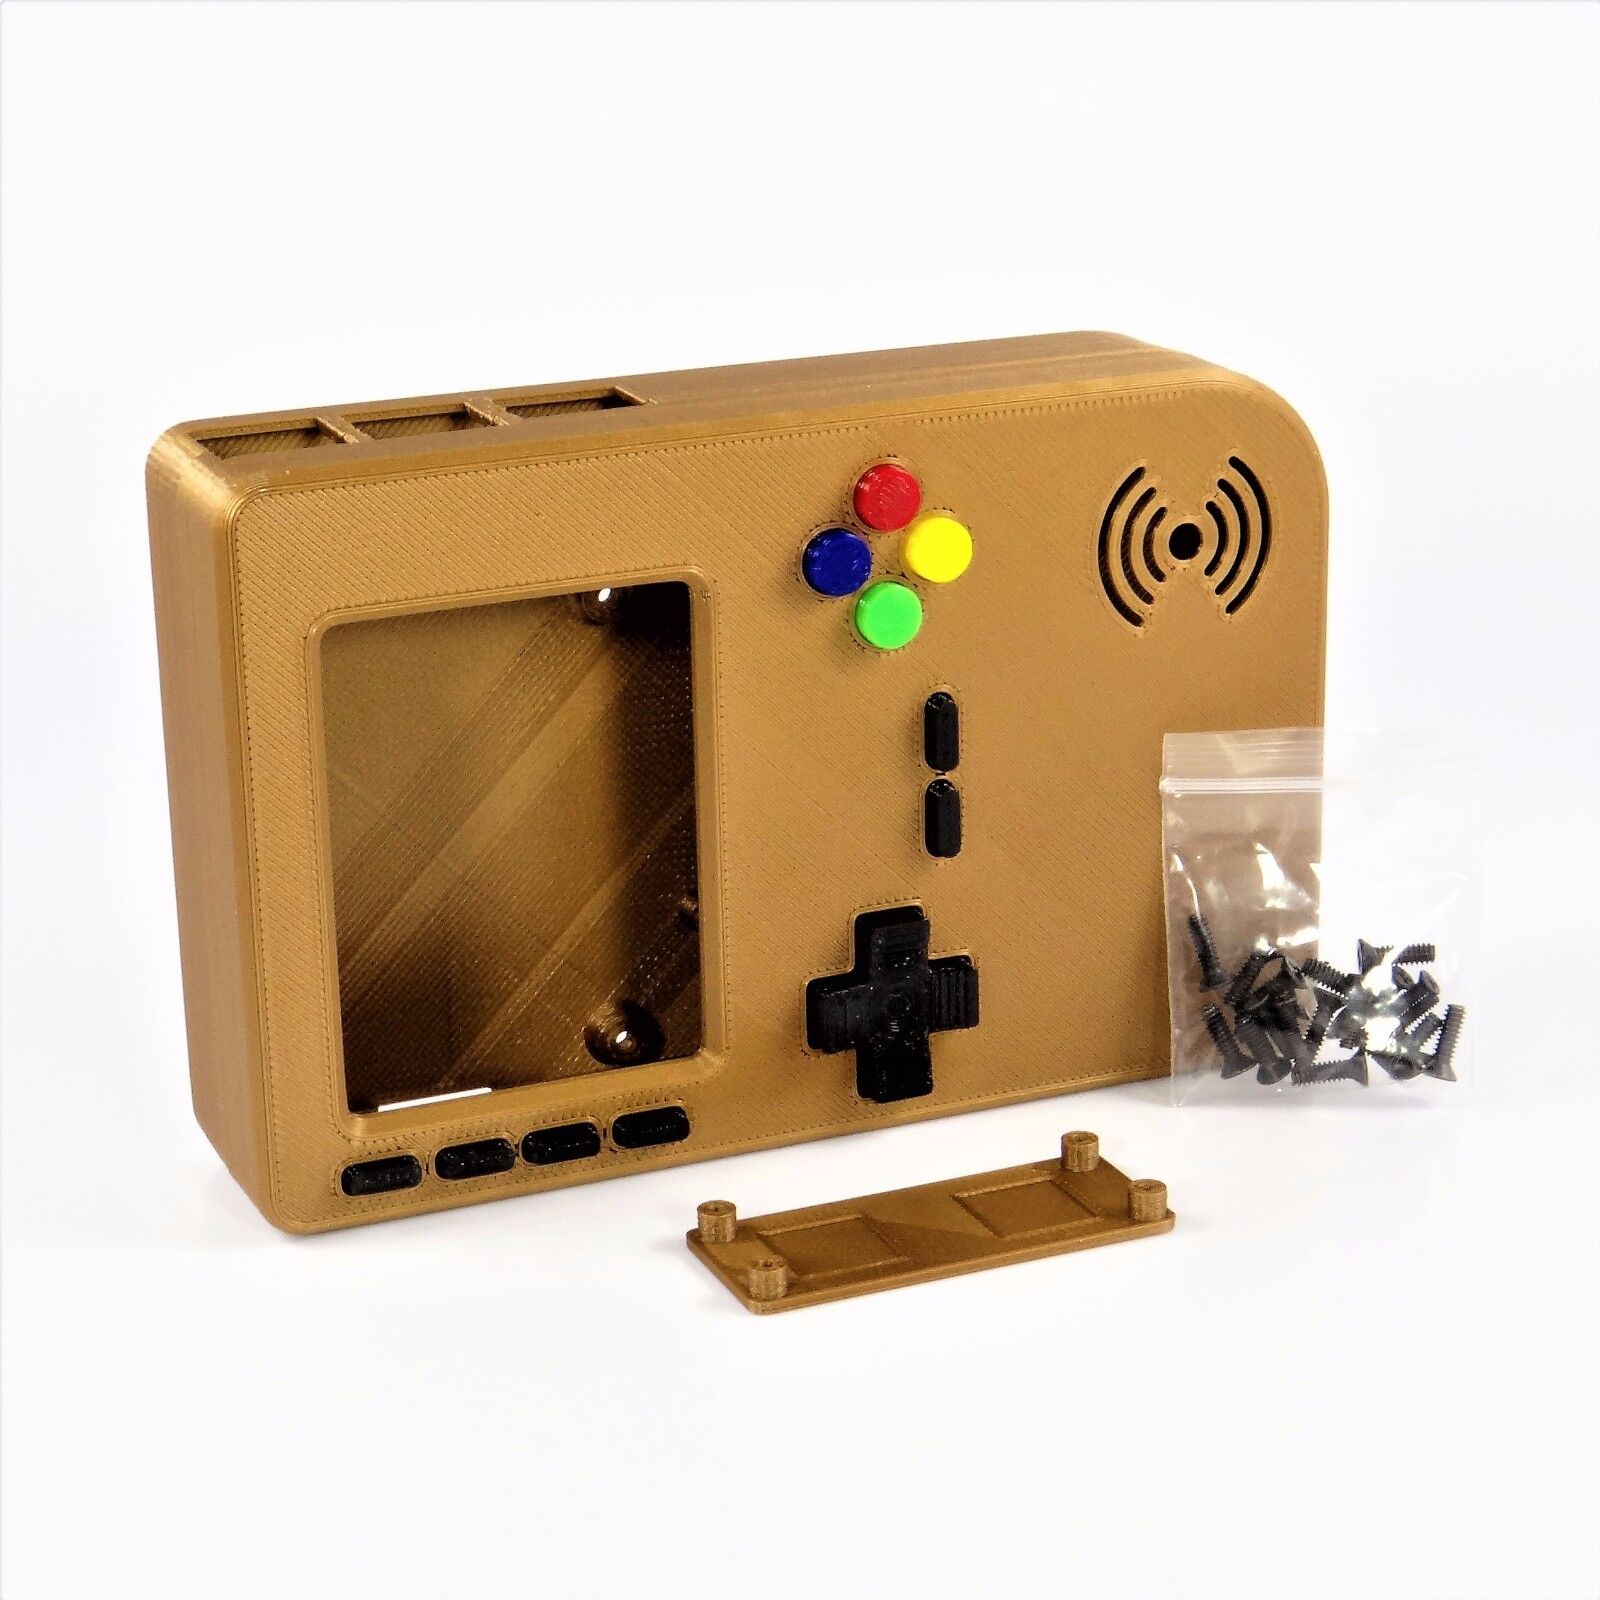 PiGRRL 2 COPPER Game Boy Case with Buttons & Screws for Raspberry Pi 2/3 